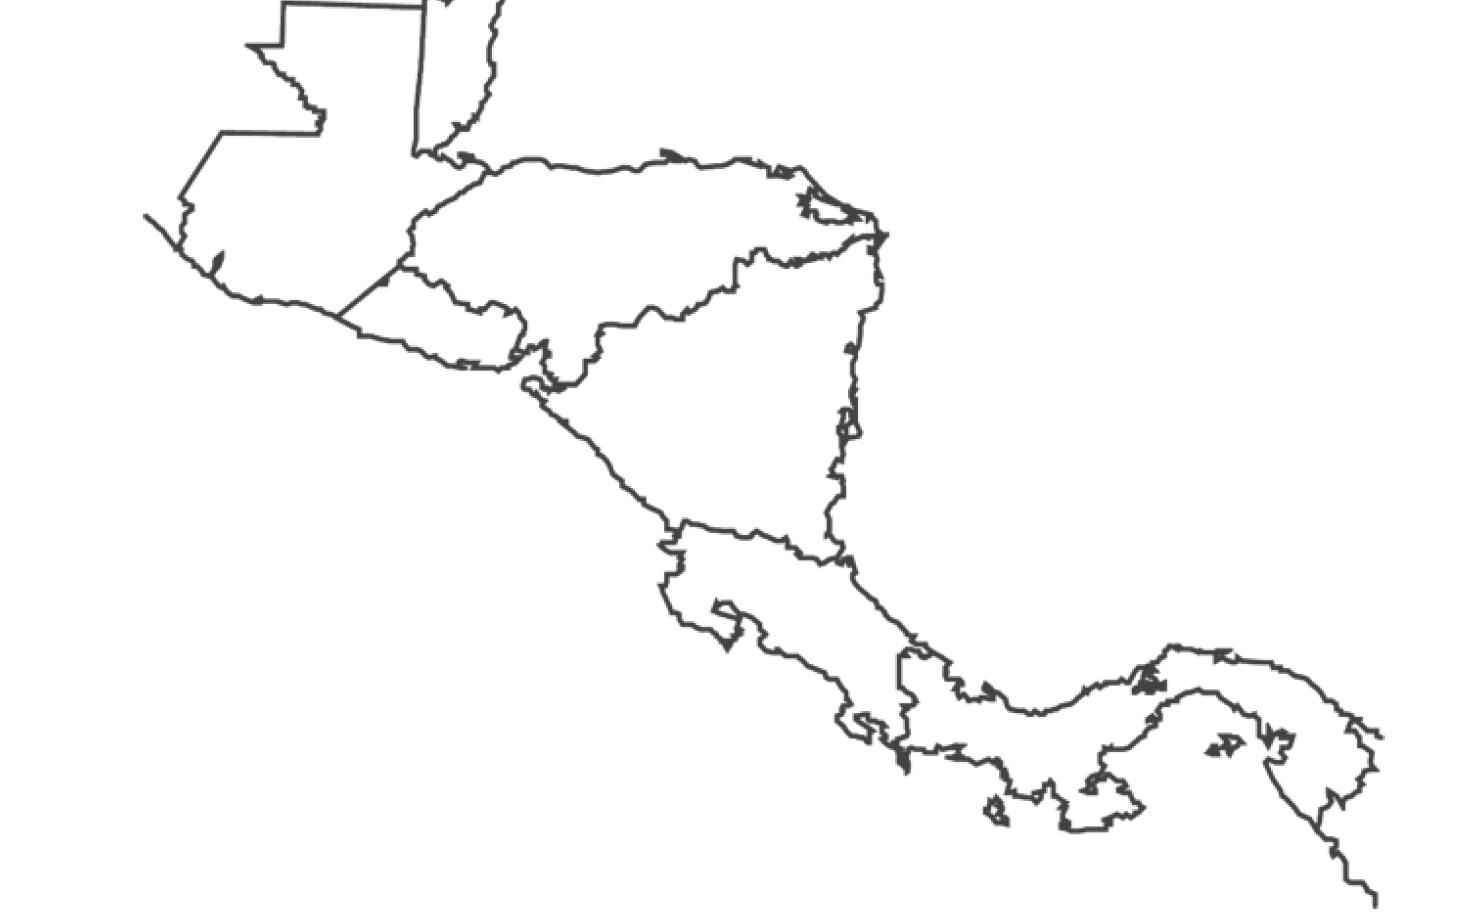 spanish-speaking-countries-in-central-america-and-caribbean-map-review